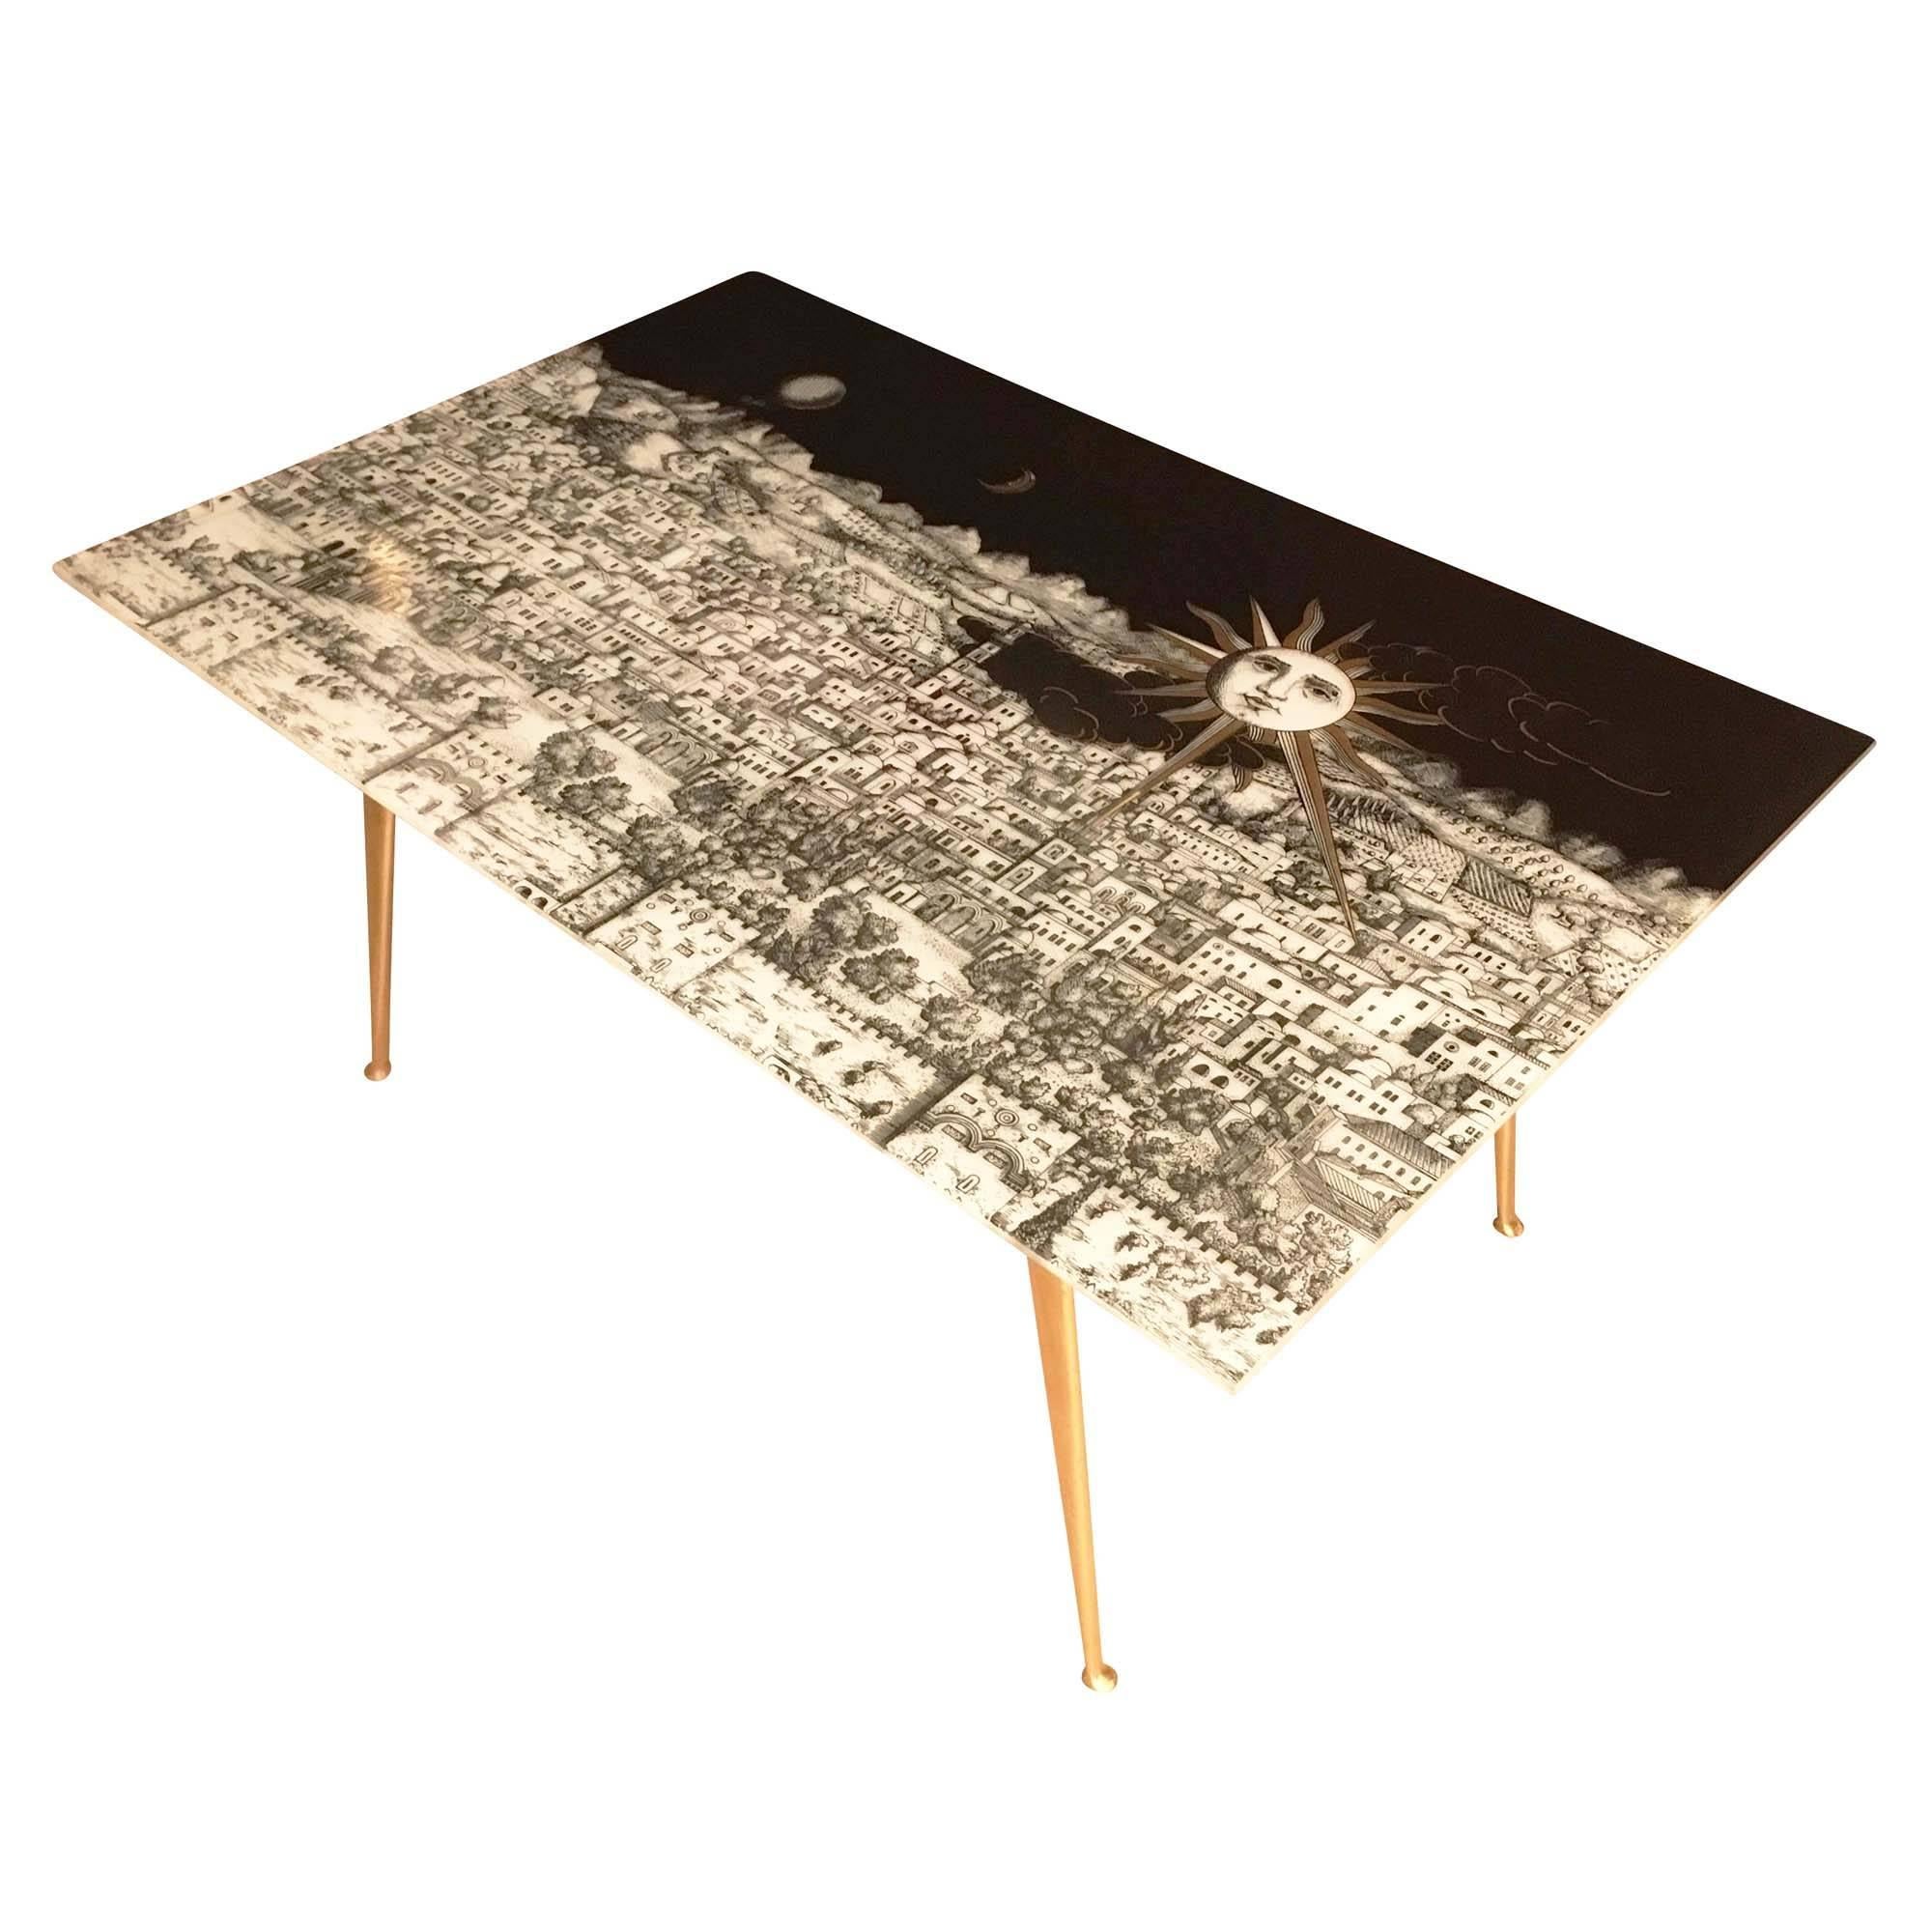 Beautiful Fornasetti coffee table from the 1990s with a screen printed glass top featuring the “Gerusalemme” motif. Marked on the bottom left corner. The glass top was originally conceived as a decorative wall panel and has been placed on a